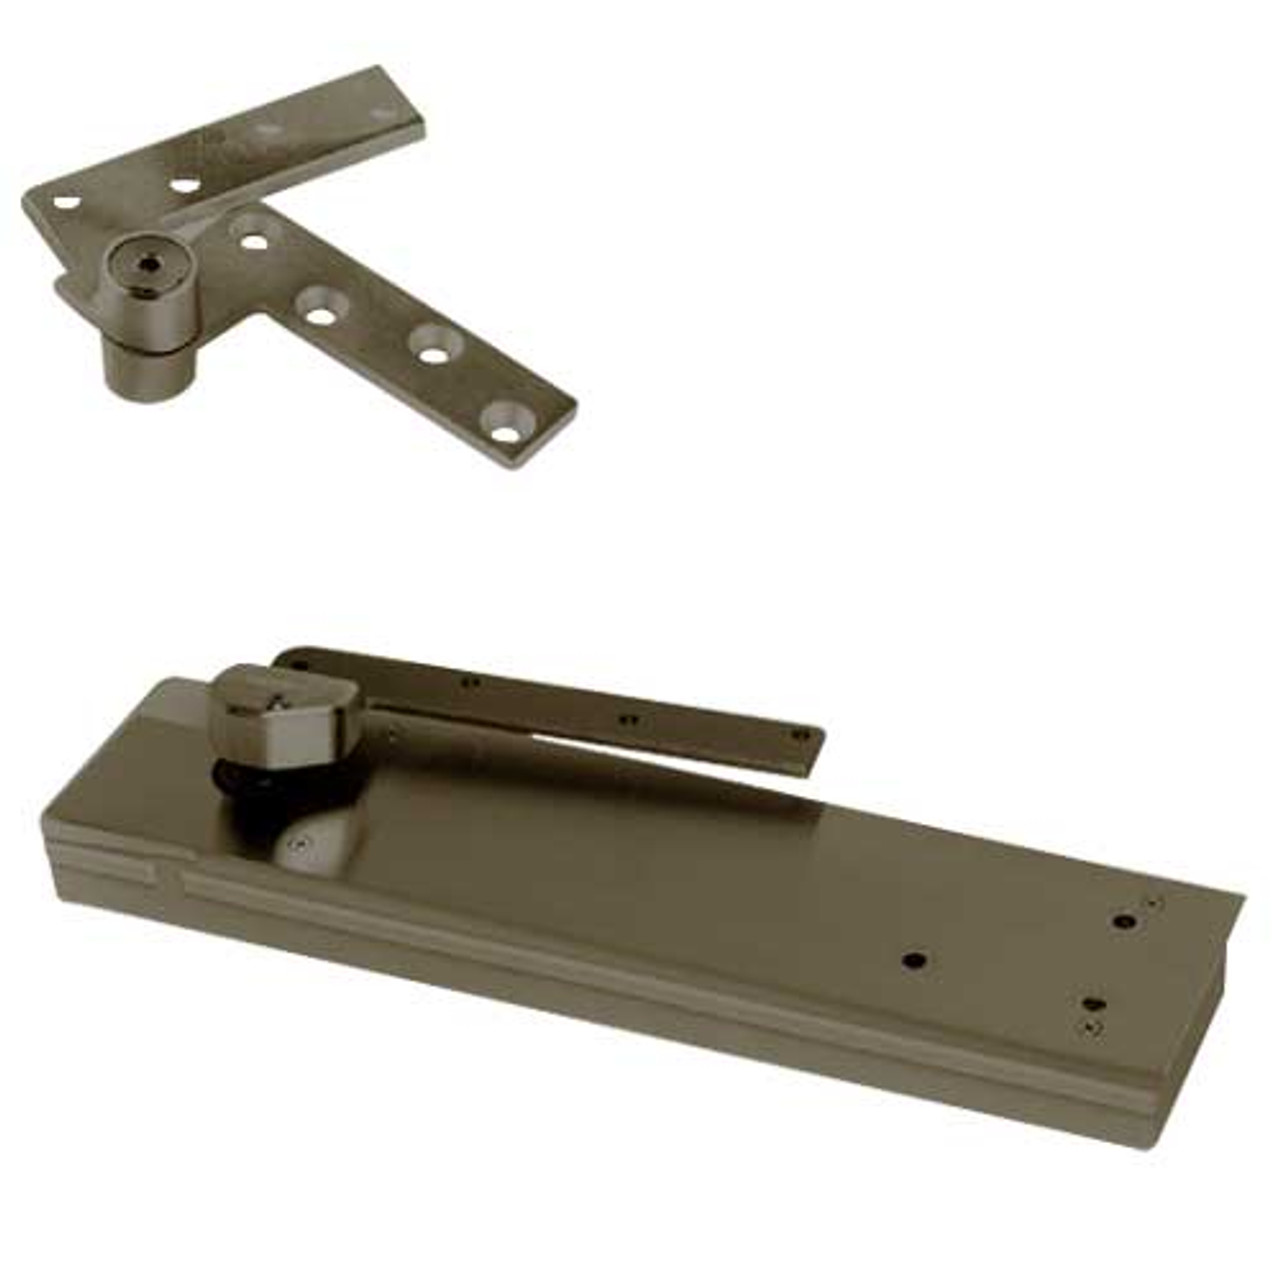 5103ABC105-1-1/2OS-LCC-LH-613 Rixson 51 Series 1-1/2" Offset Hung Shallow Depth Floor Closers in Dark Bronze Finish